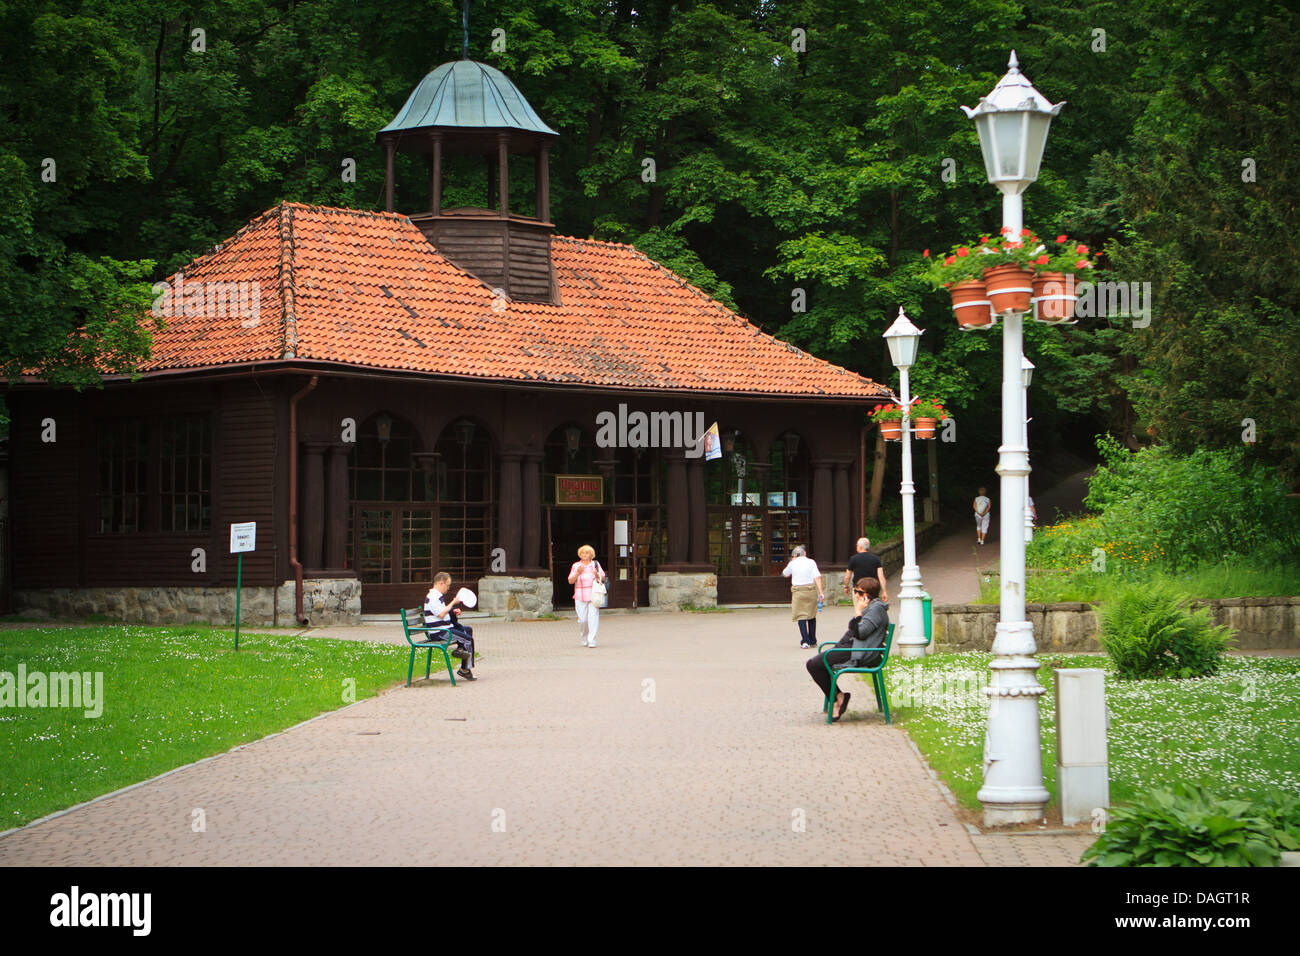 'Jan' - old pump room in Krynica-Zdroj - resort and spa in Beskidy mountains, southern Poland. Stock Photo